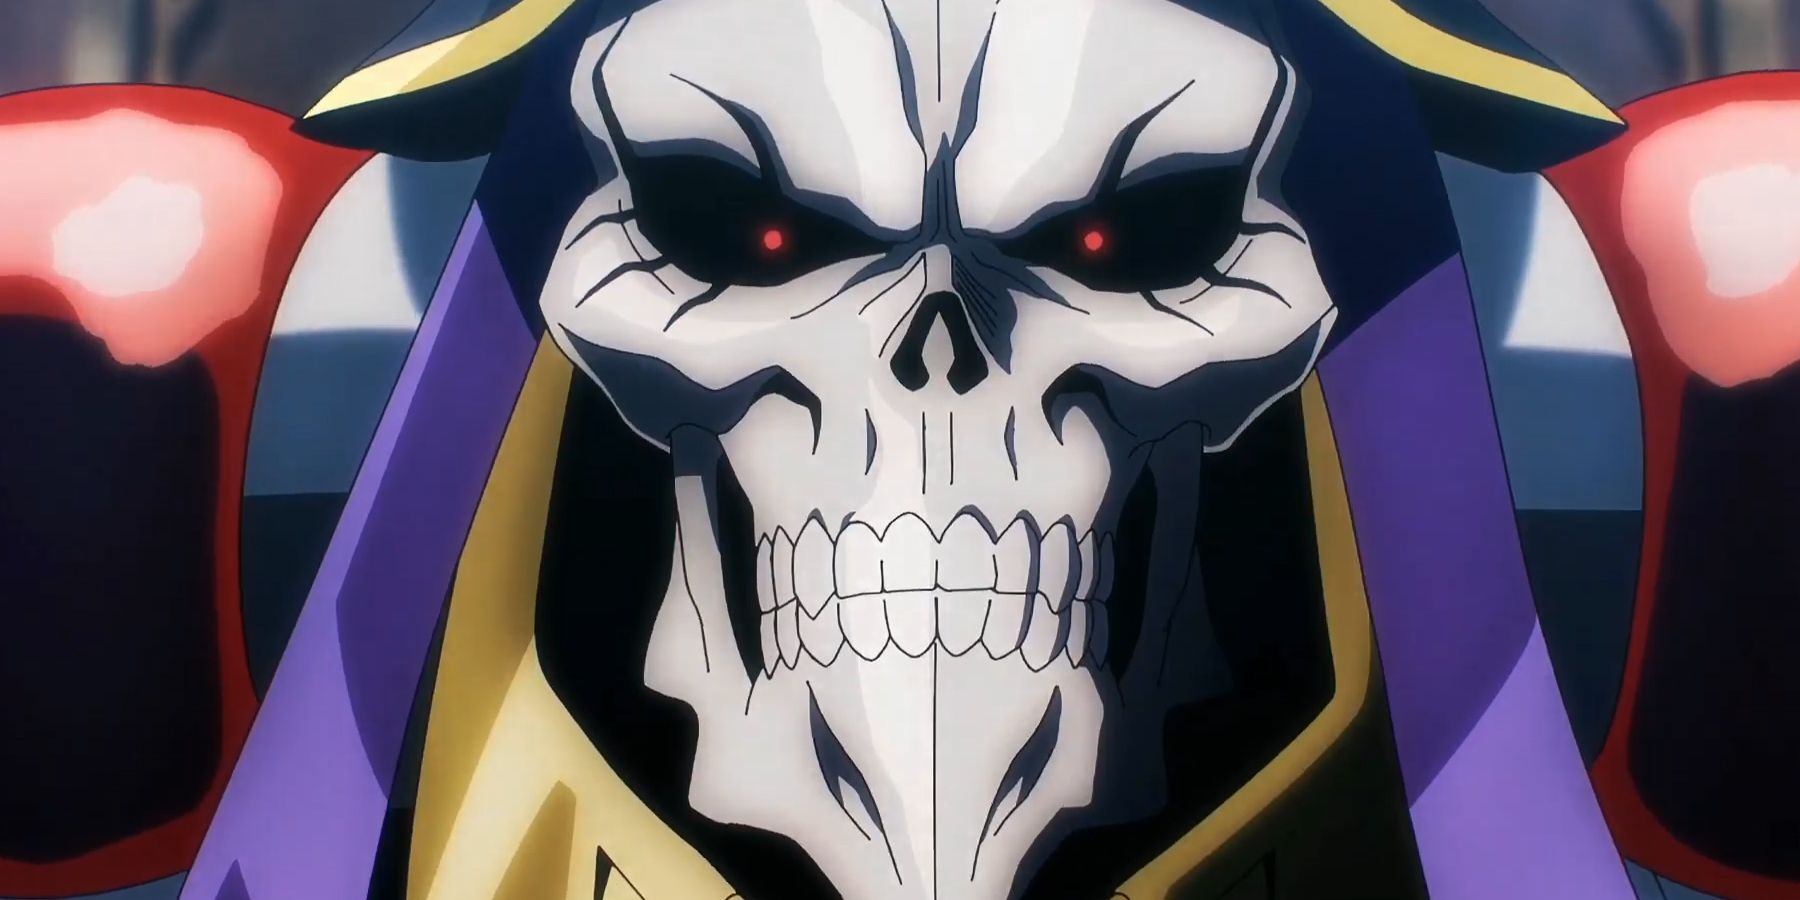 Anime Corner - Looks like Ainz was taking notes! Vote for Overlord IV:  acani.me/summer22-v04